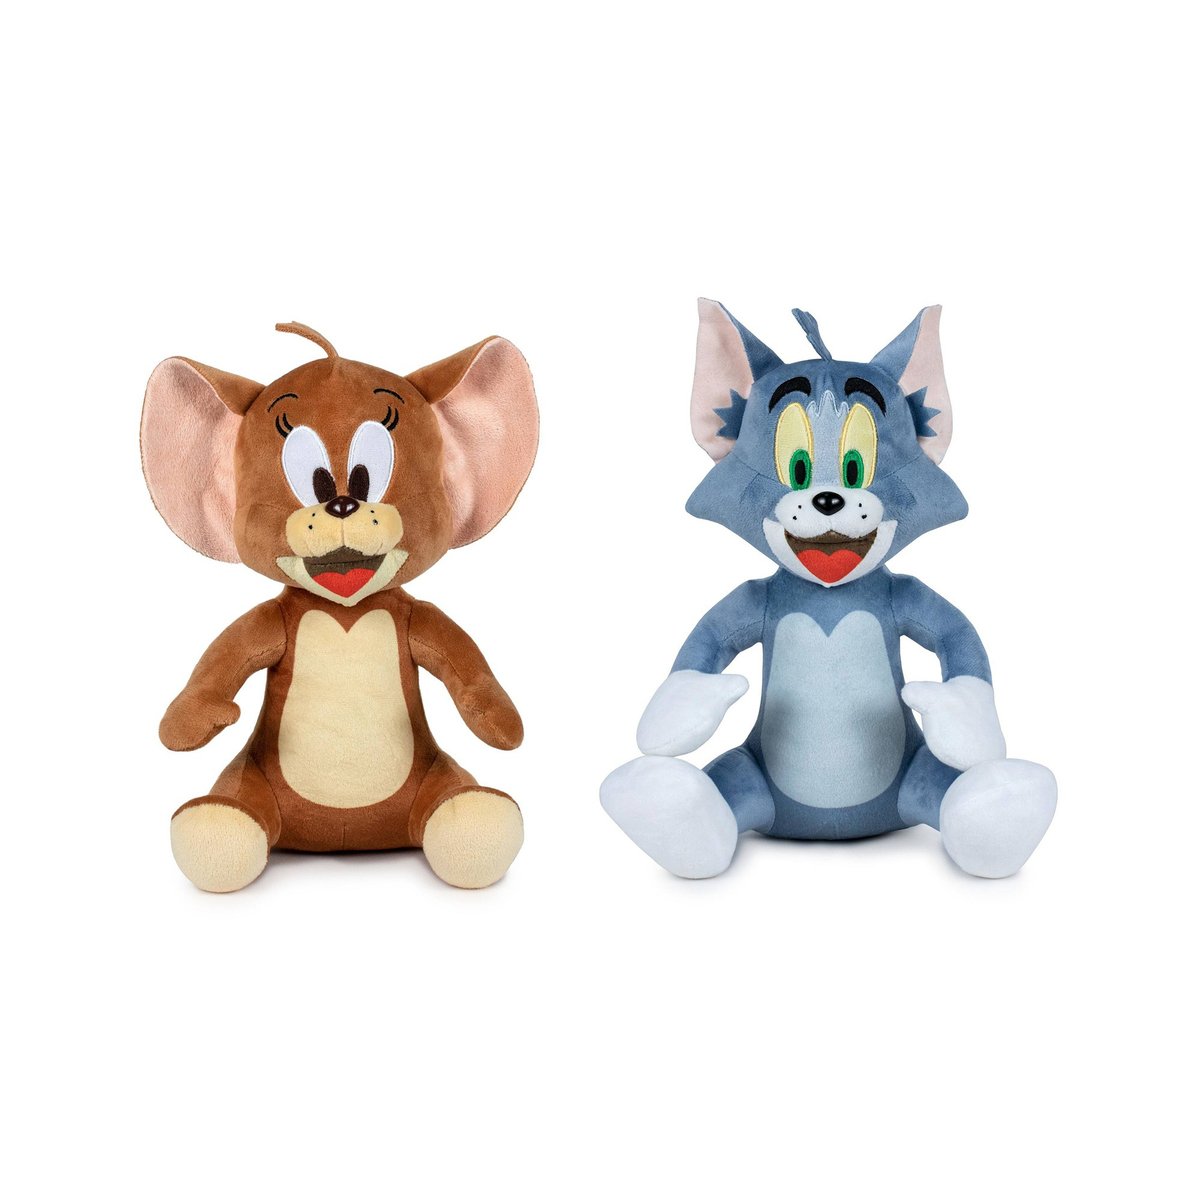 Tom & Jerry Classic Plush Soft Toys, 8 inches, Assorted, 760022180